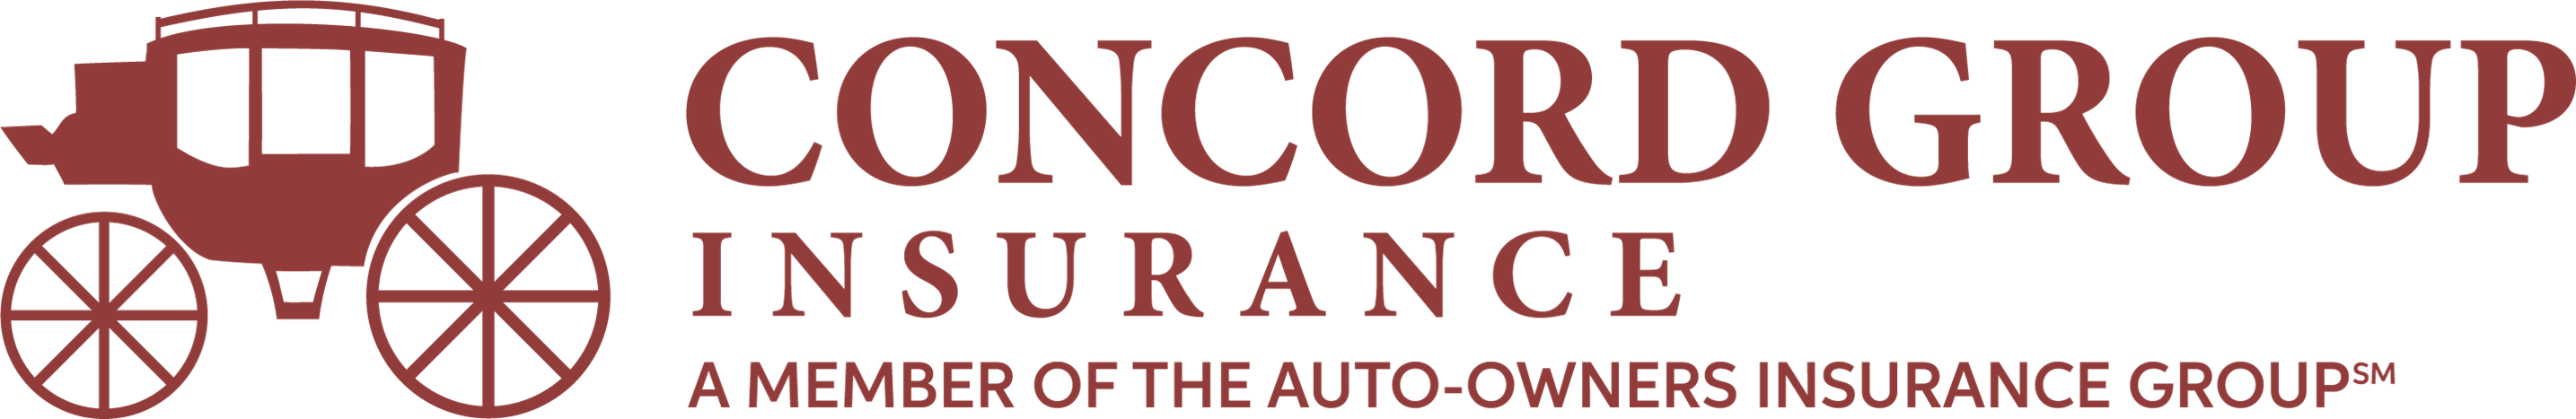 Concord Group Insurance Logo